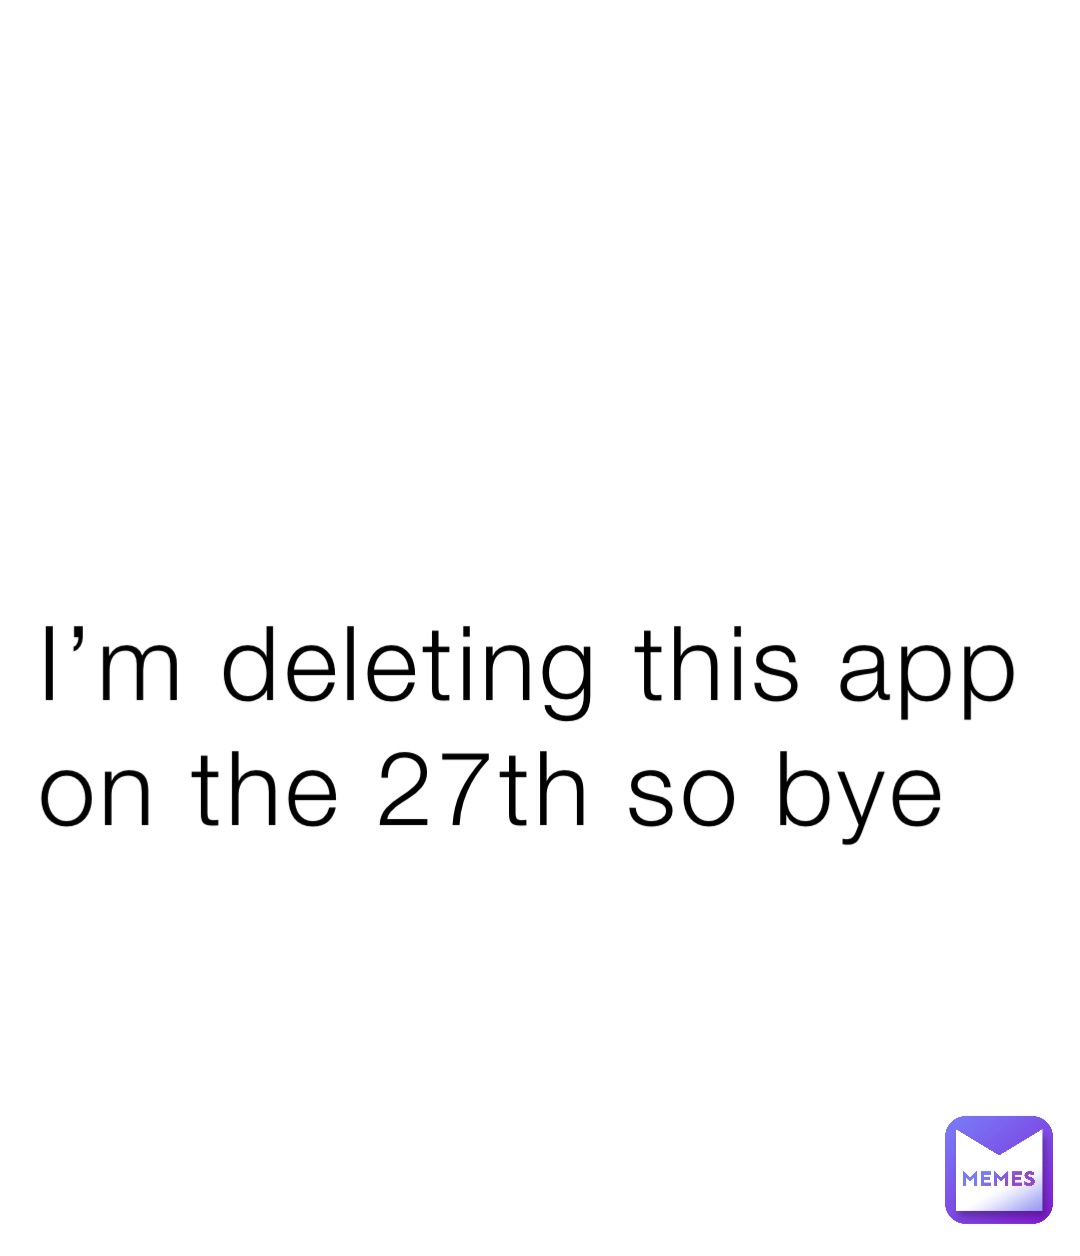 I’m deleting this app on the 27th so bye